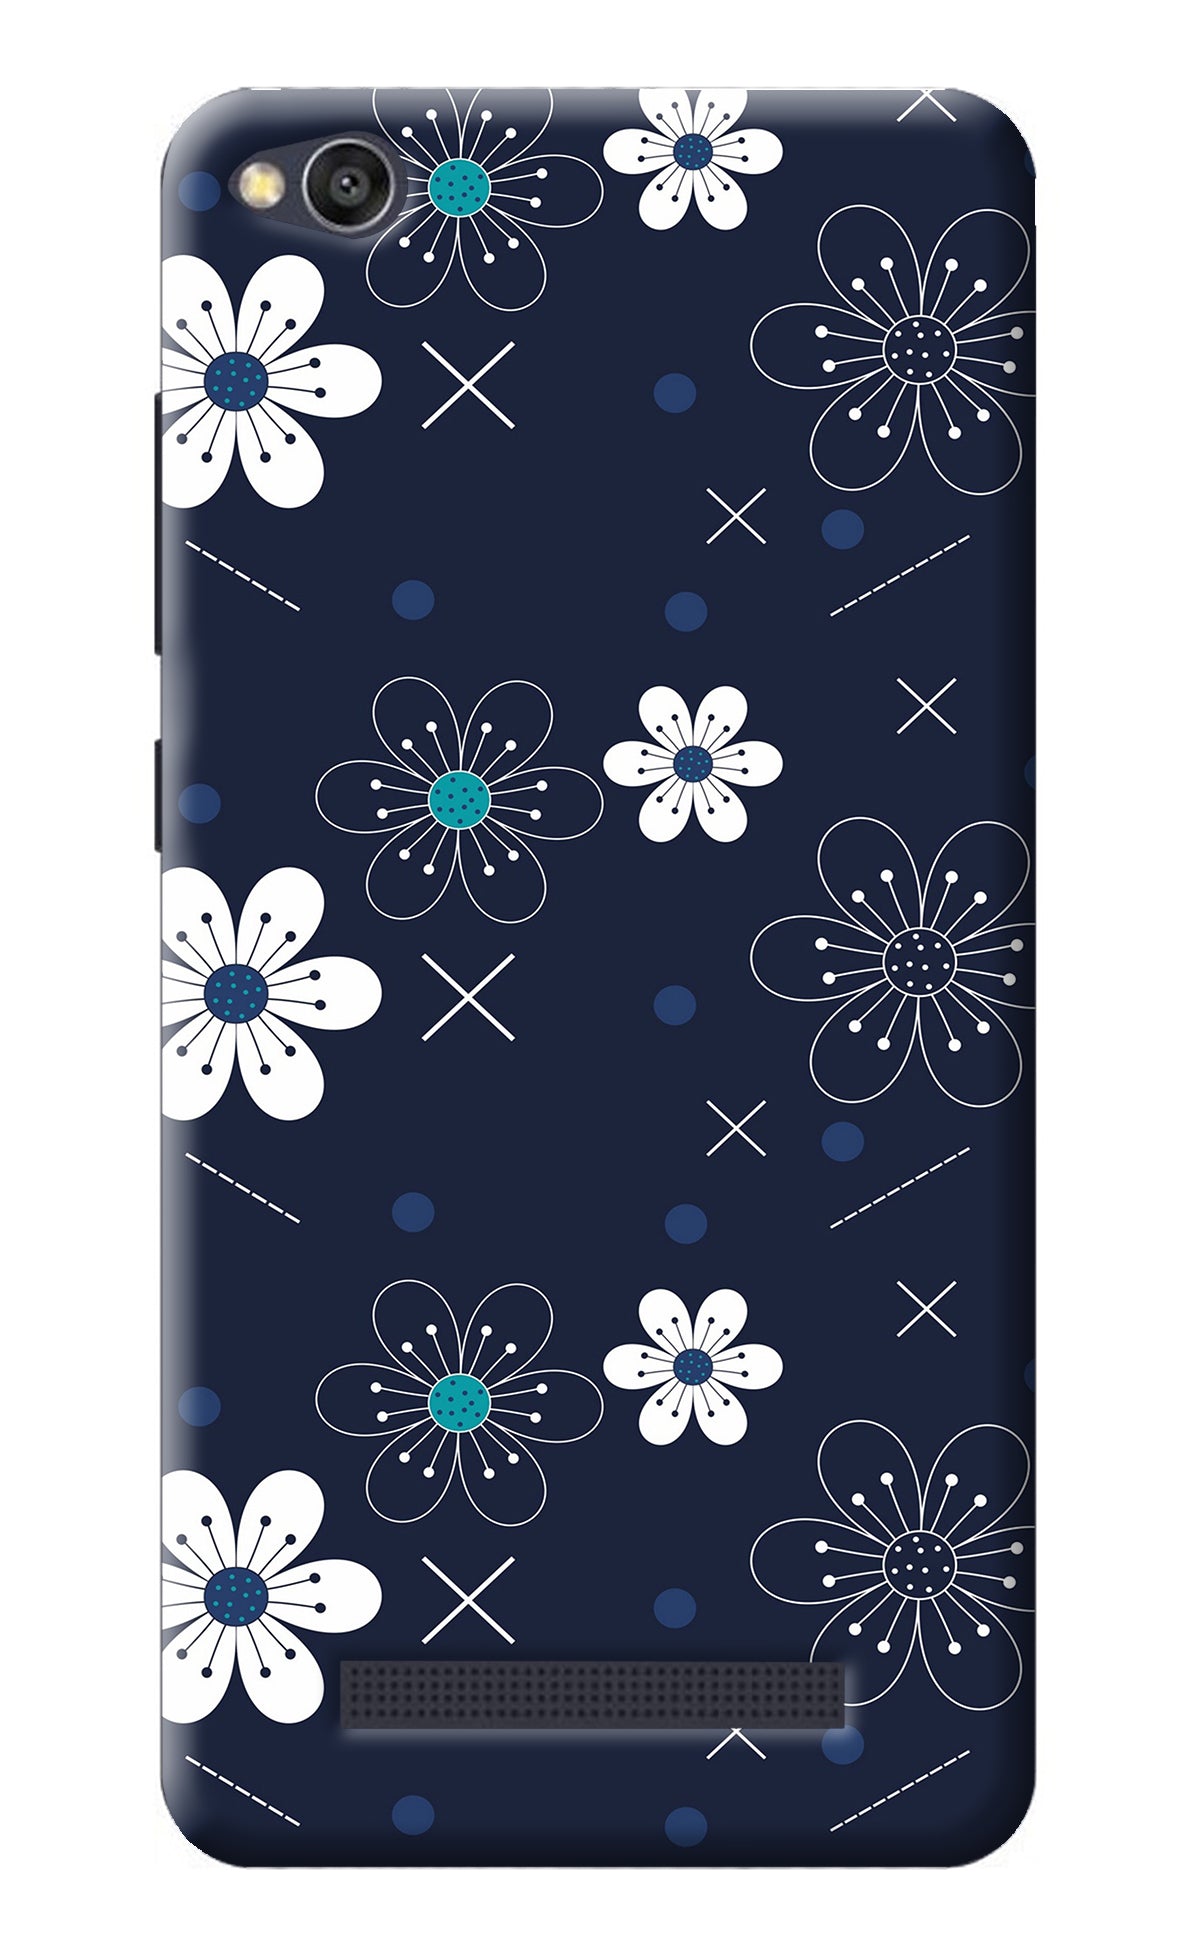 Flowers Redmi 4A Back Cover